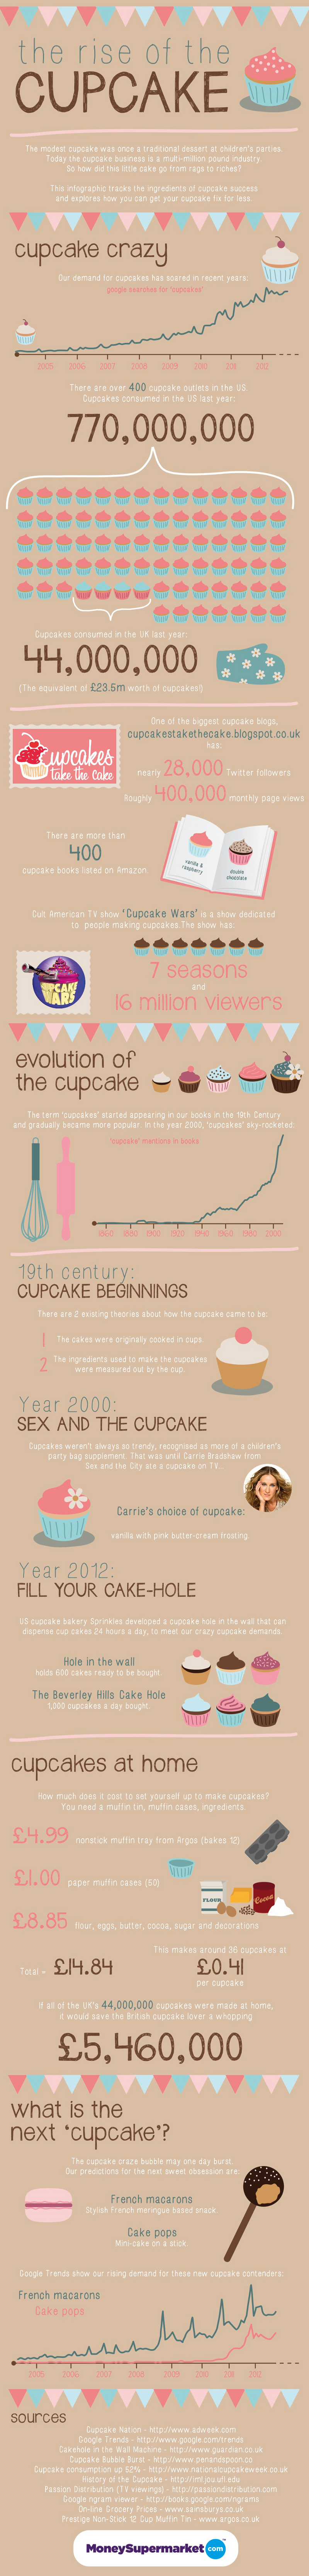 Cupcake Industry Statistics and Trends